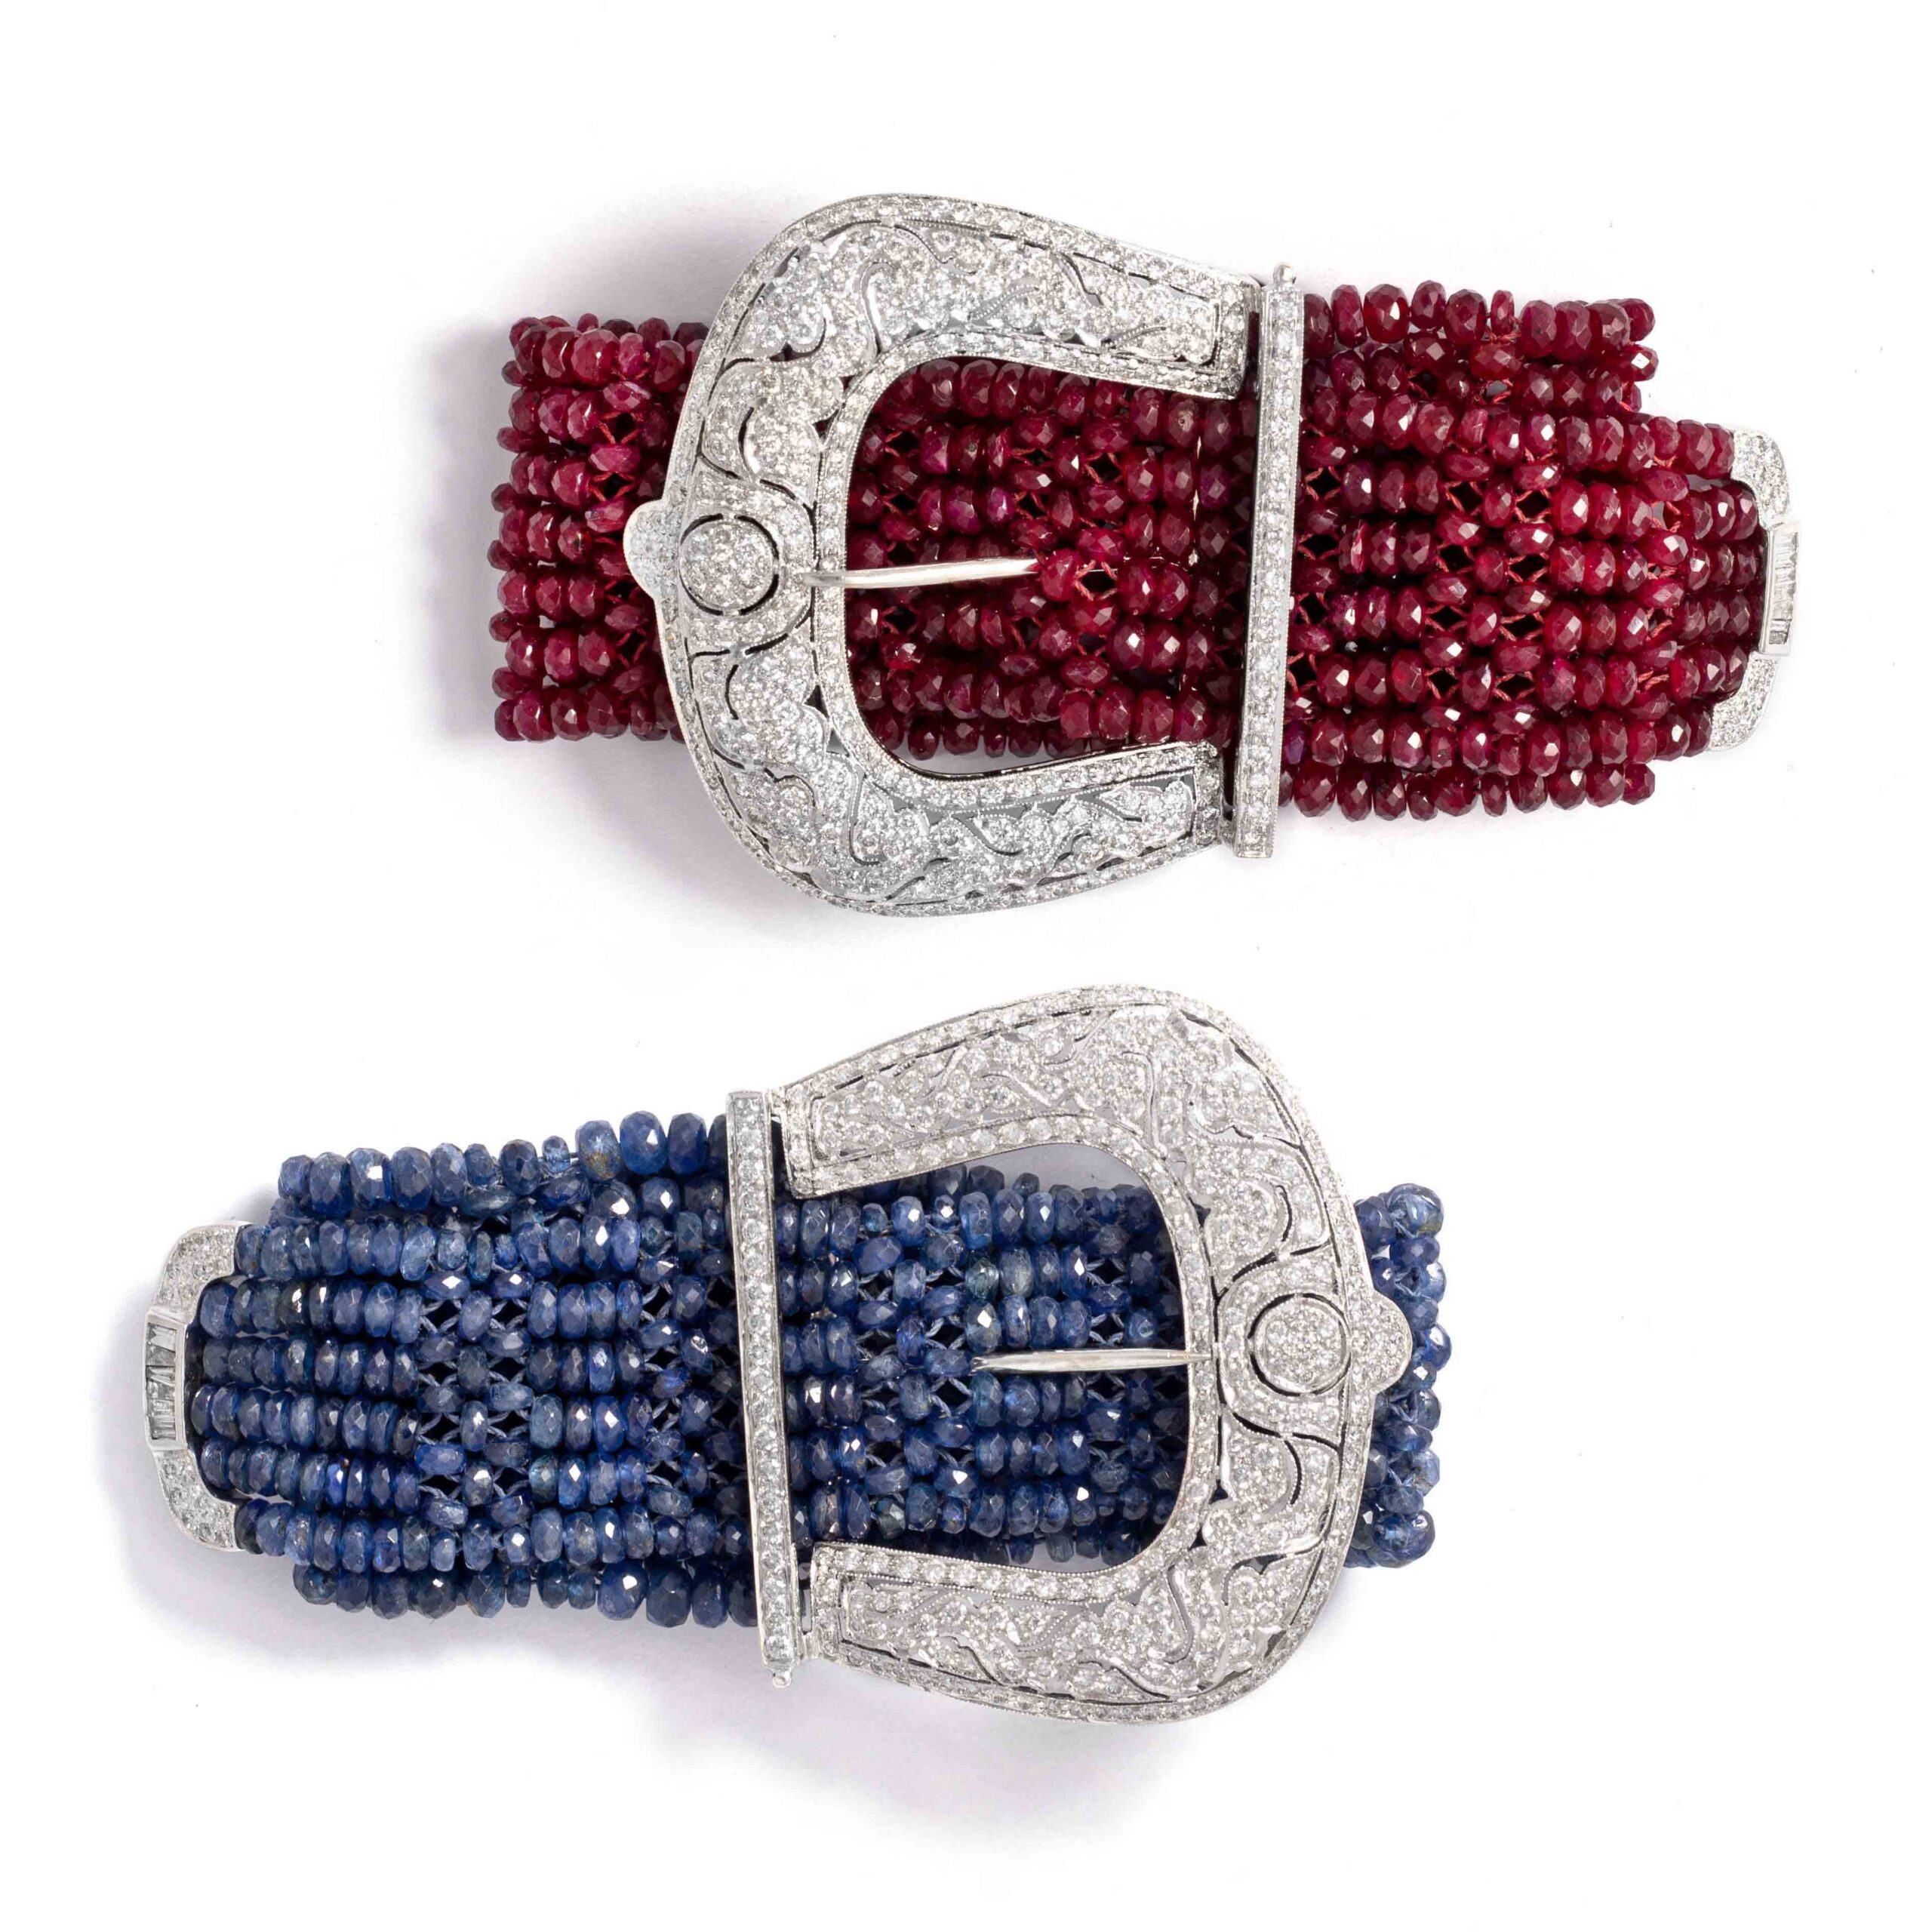 Belle Epoque design pair of diamond bracelets set respectively with rubies and sapphires.